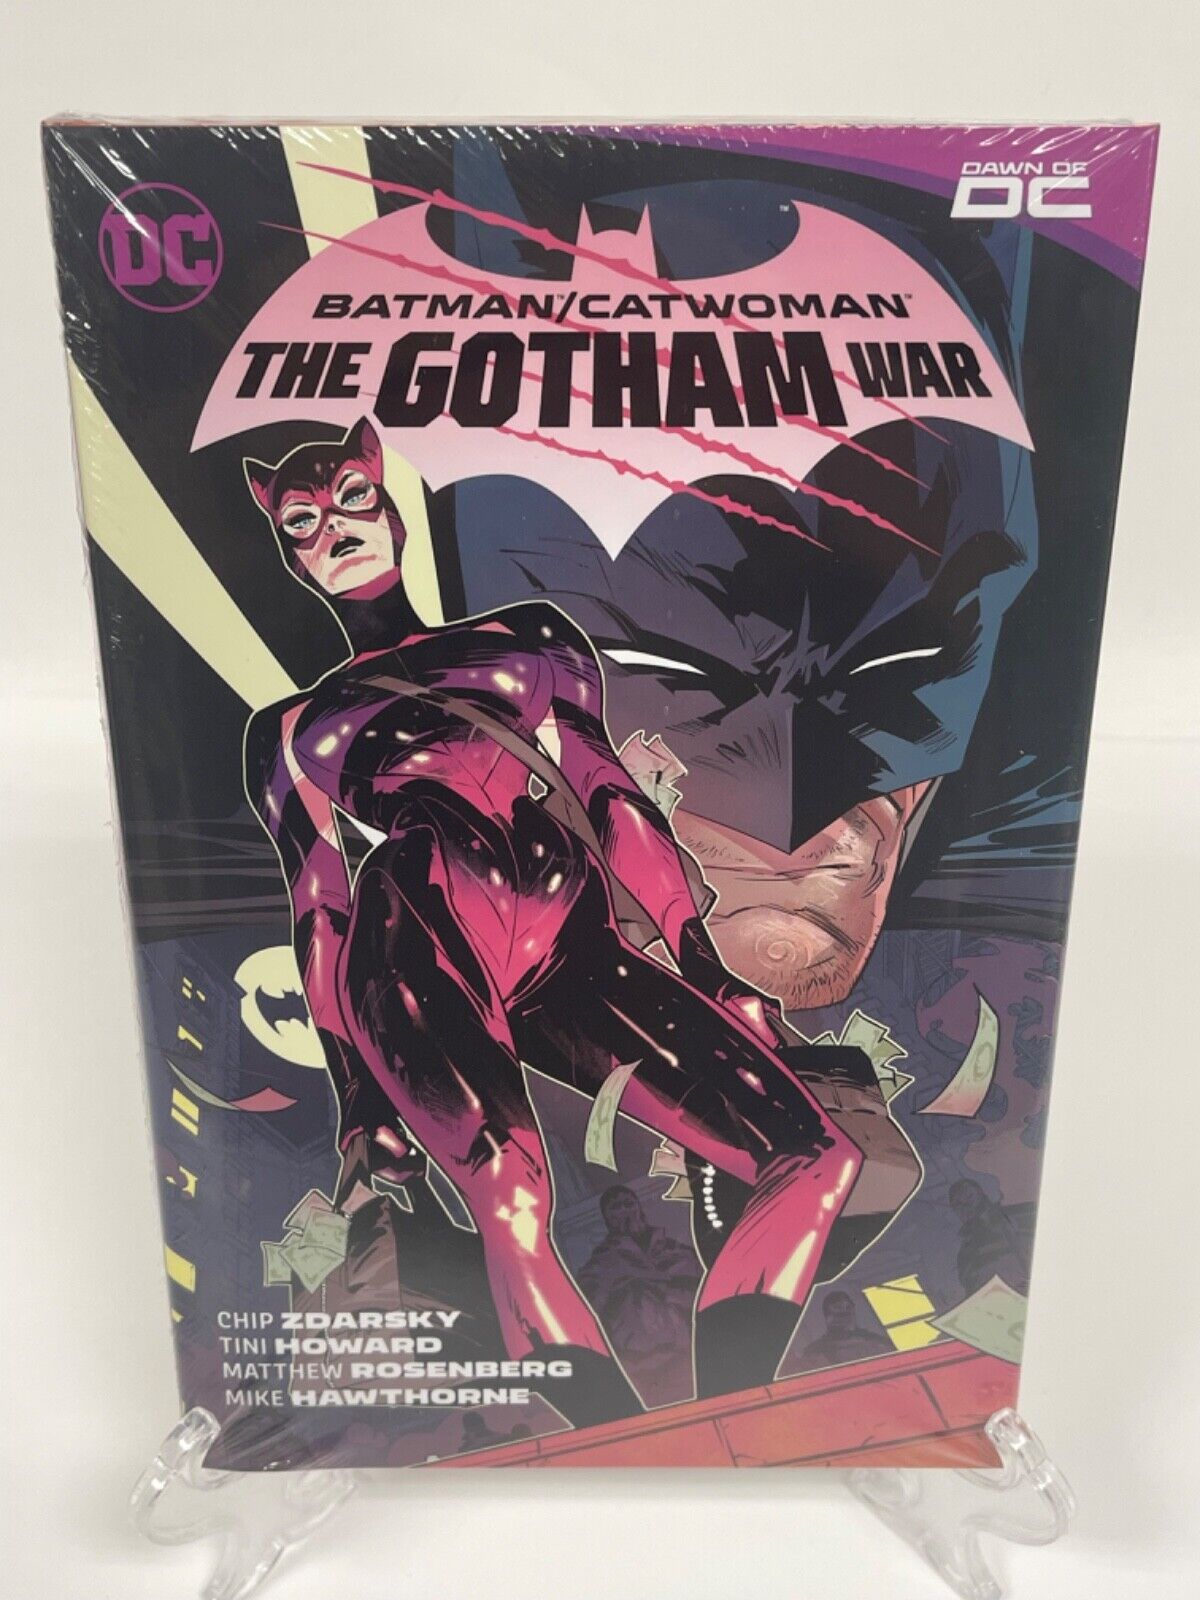 Batman Catwoman The Gotham War by Chip Zdarsky New DC Comics HC Hardcover Sealed